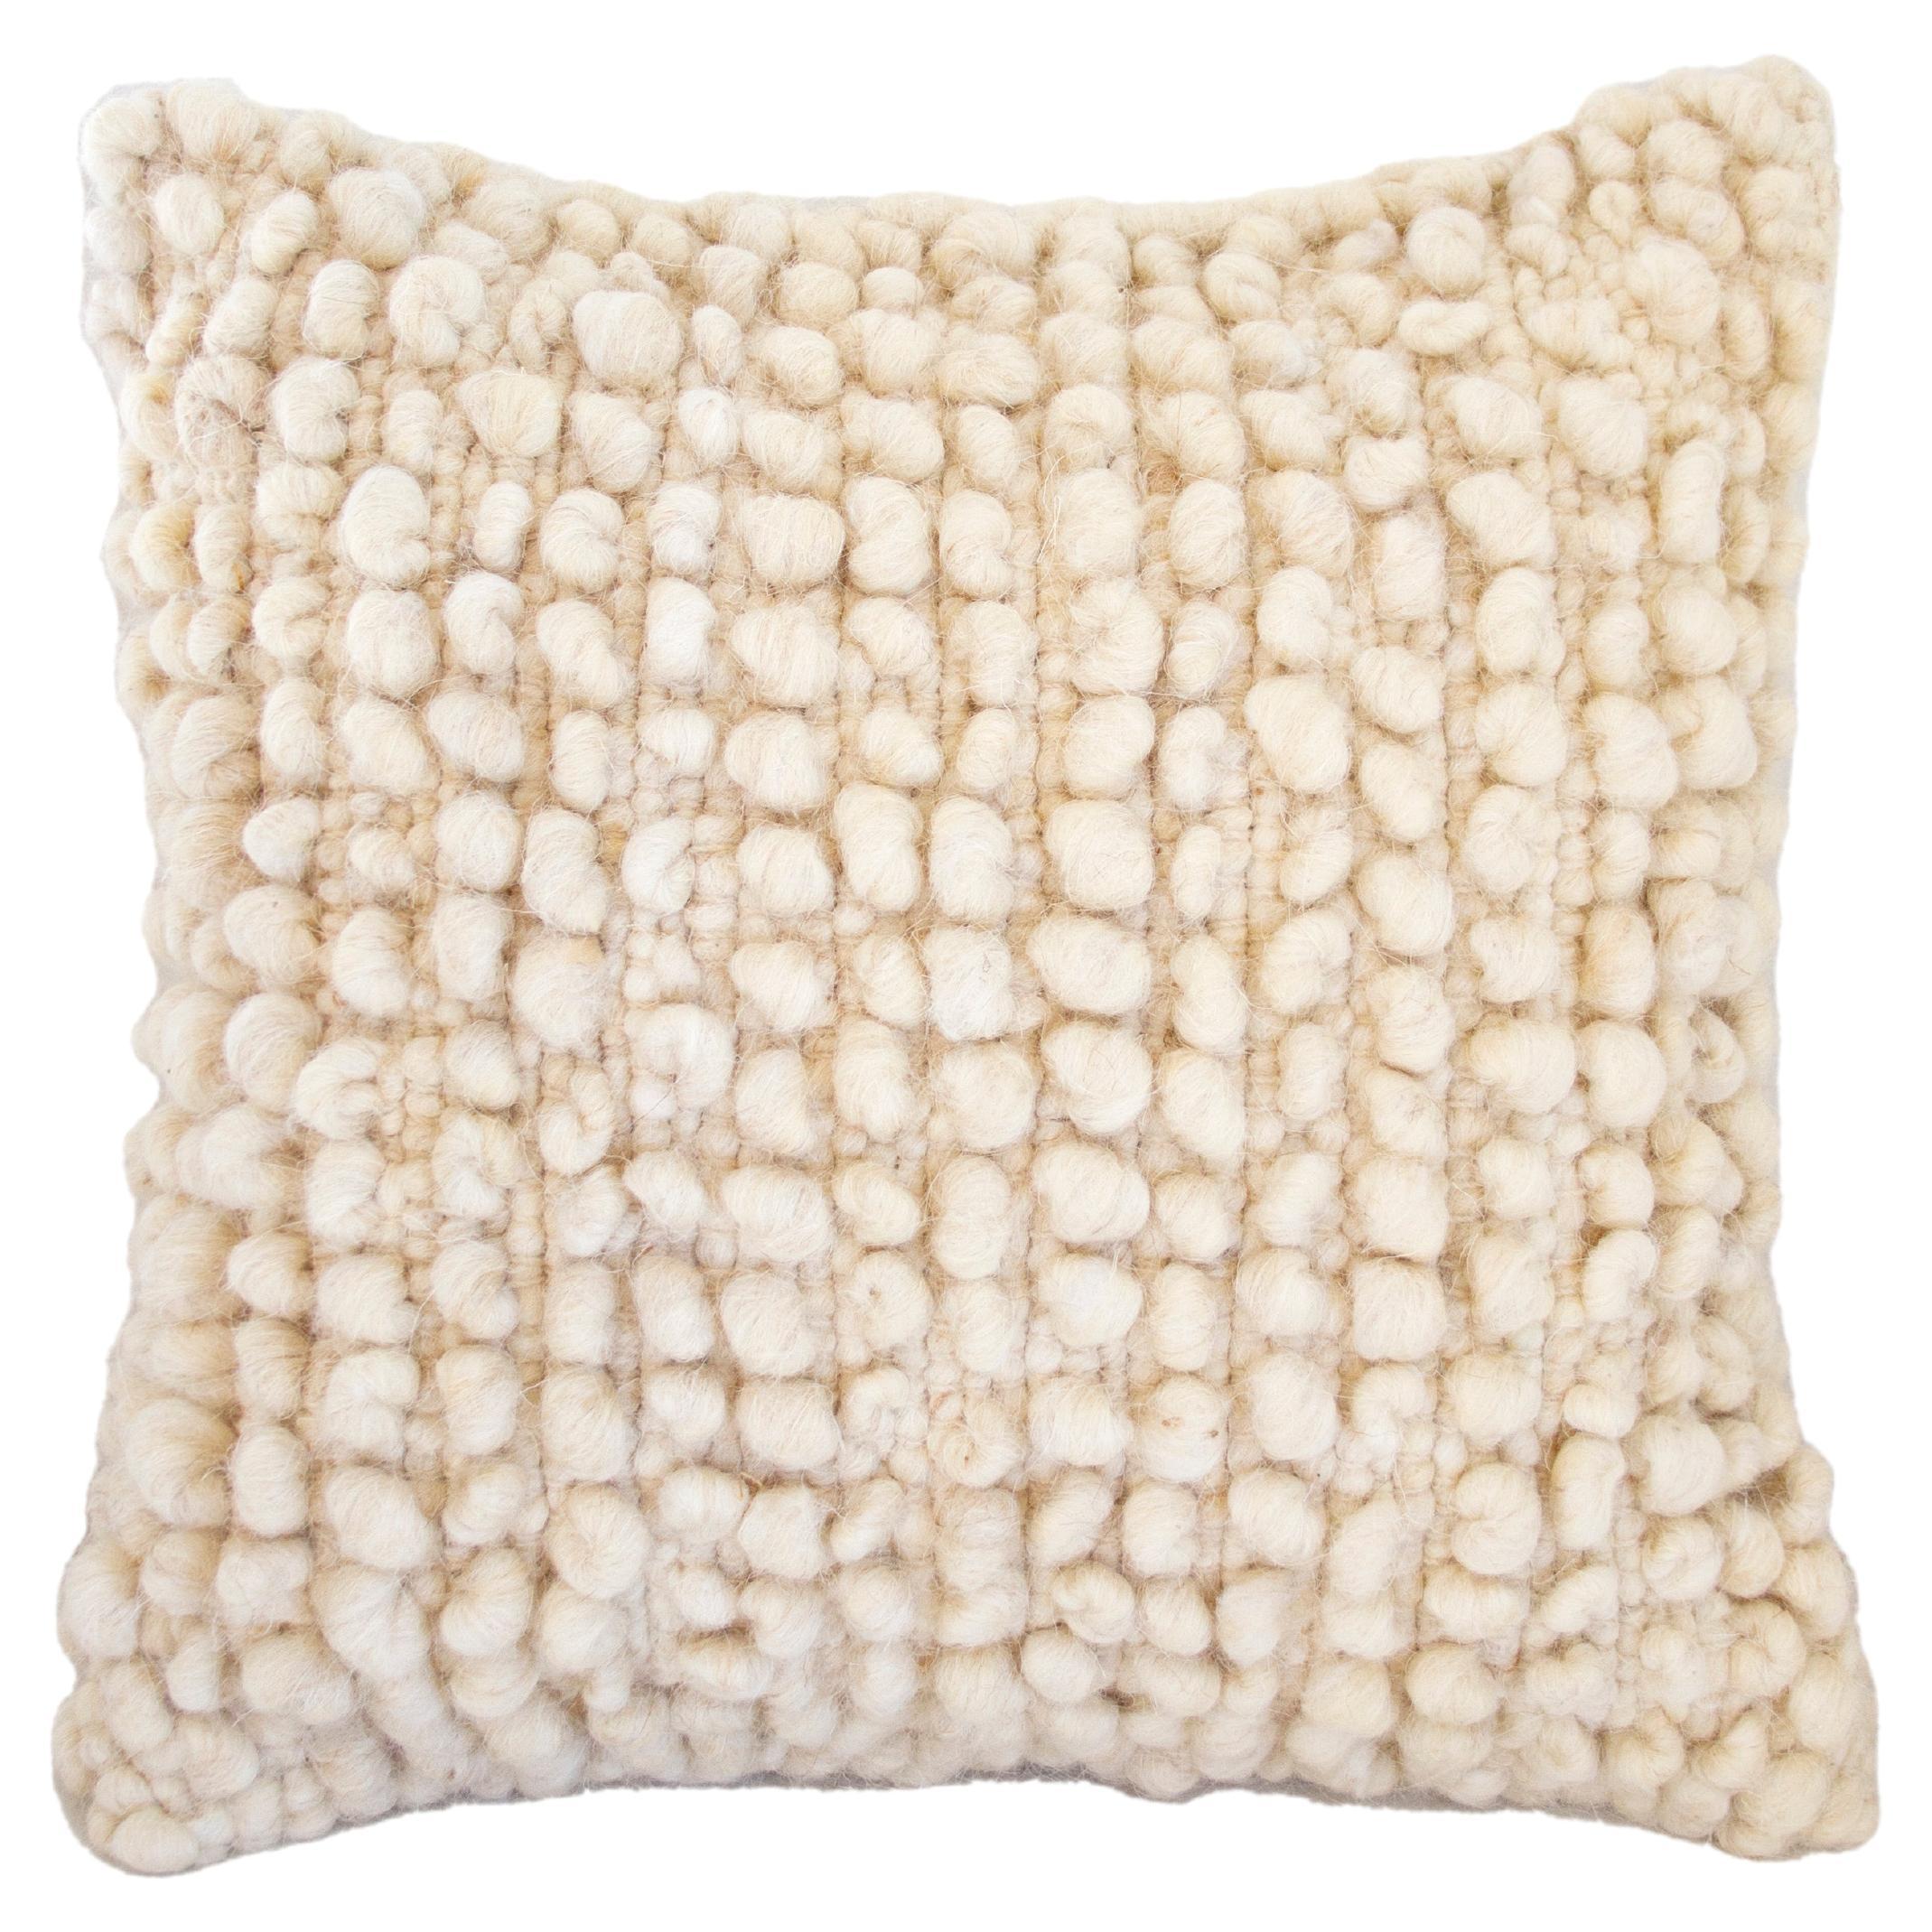 Fatima Bobble Throw Pillow in Cream White made from 100% sheep wool - 20" x 20"